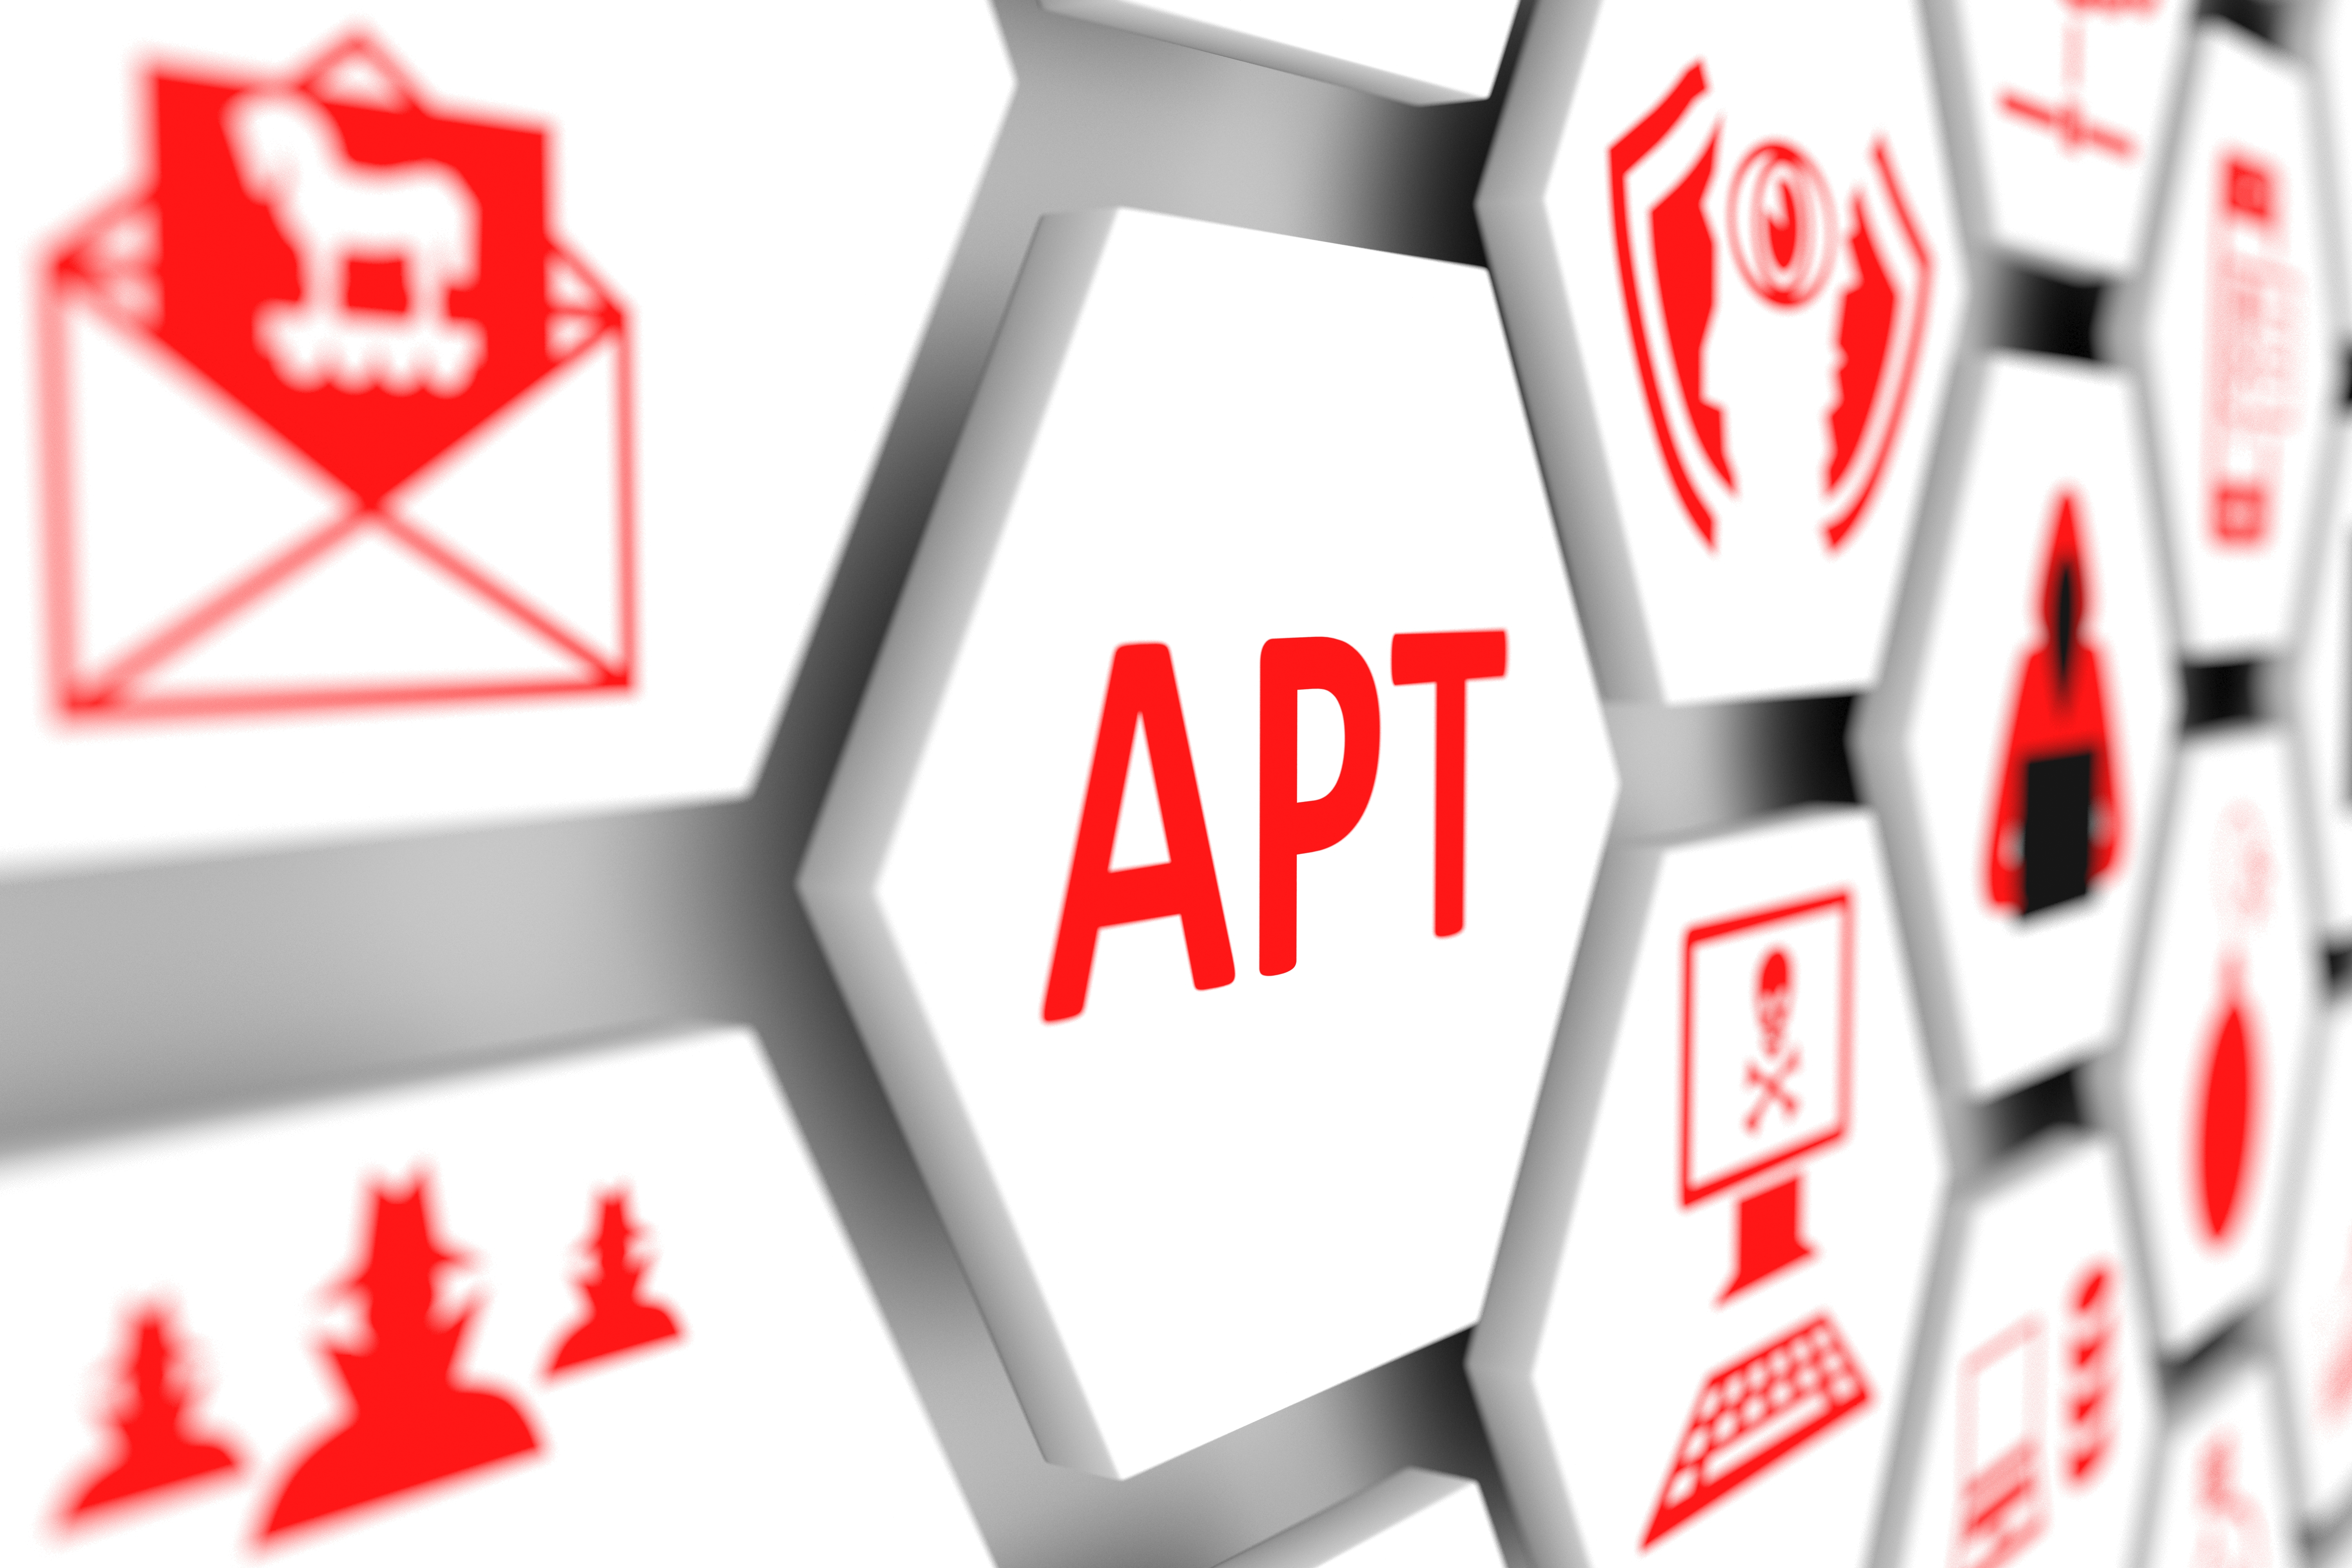 What is an Advanced Persistent Threat (APT)?